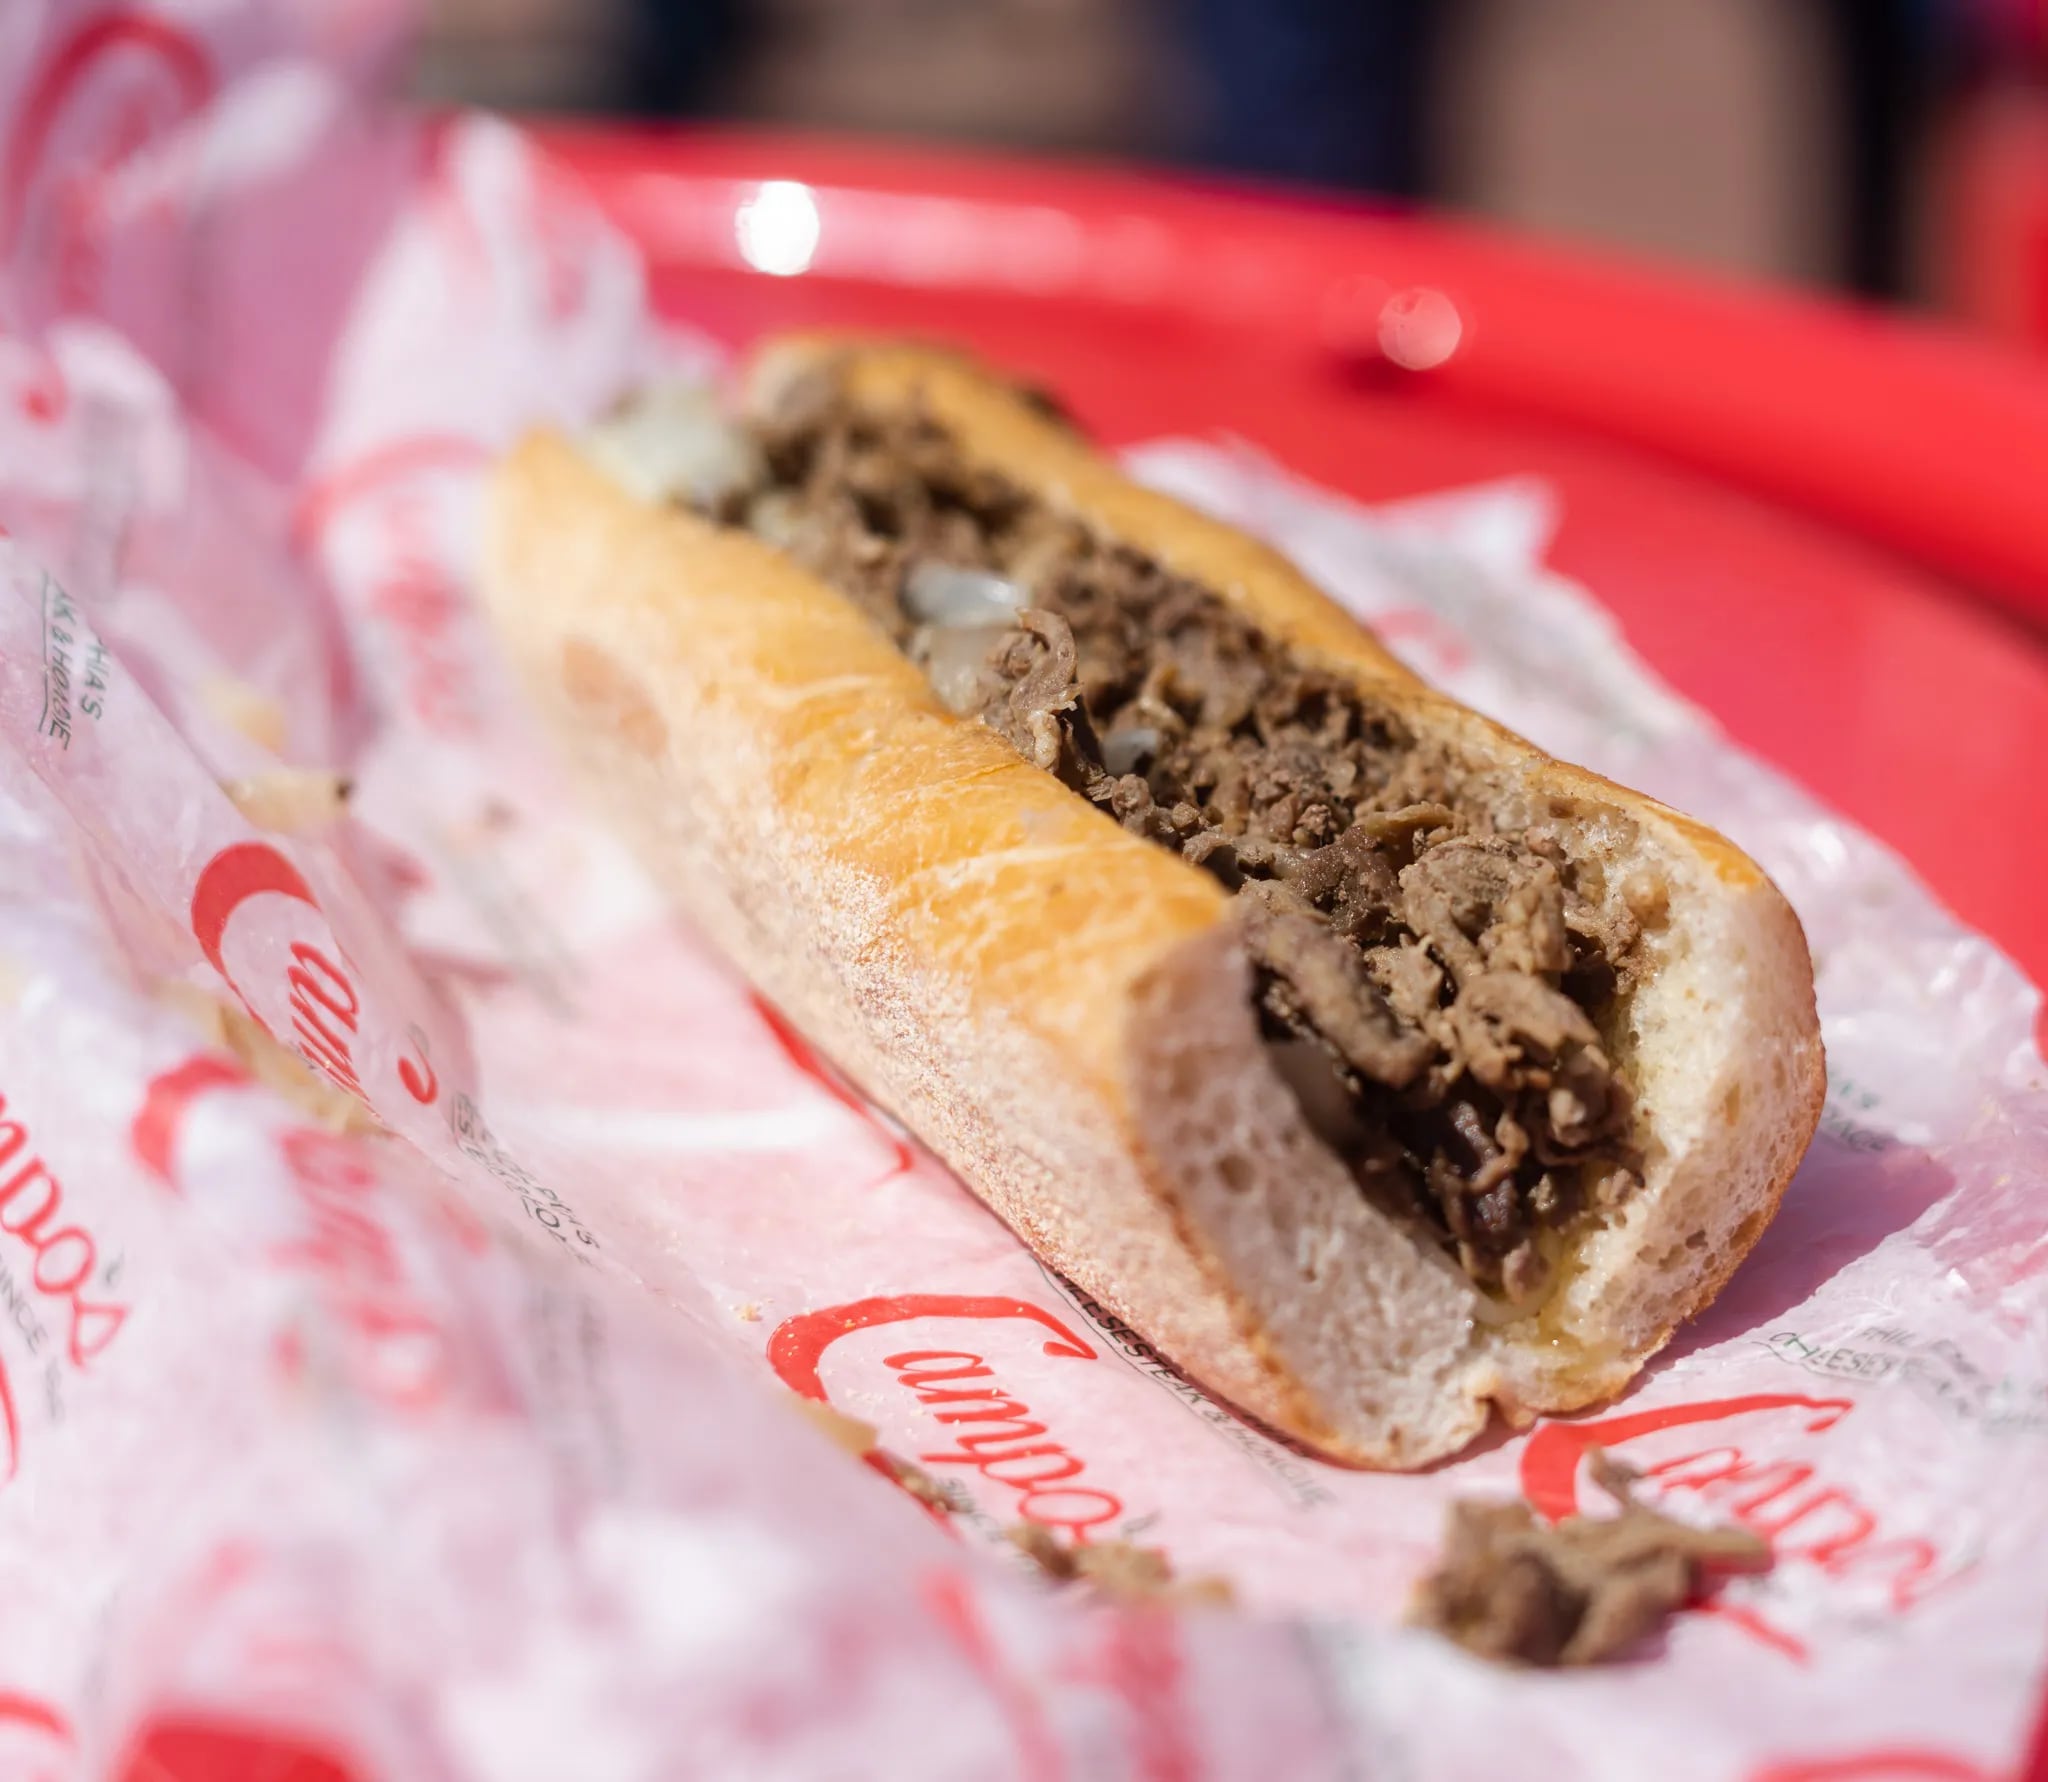 A cheesesteak from Campo's concession stand at Citizens Bank Park.